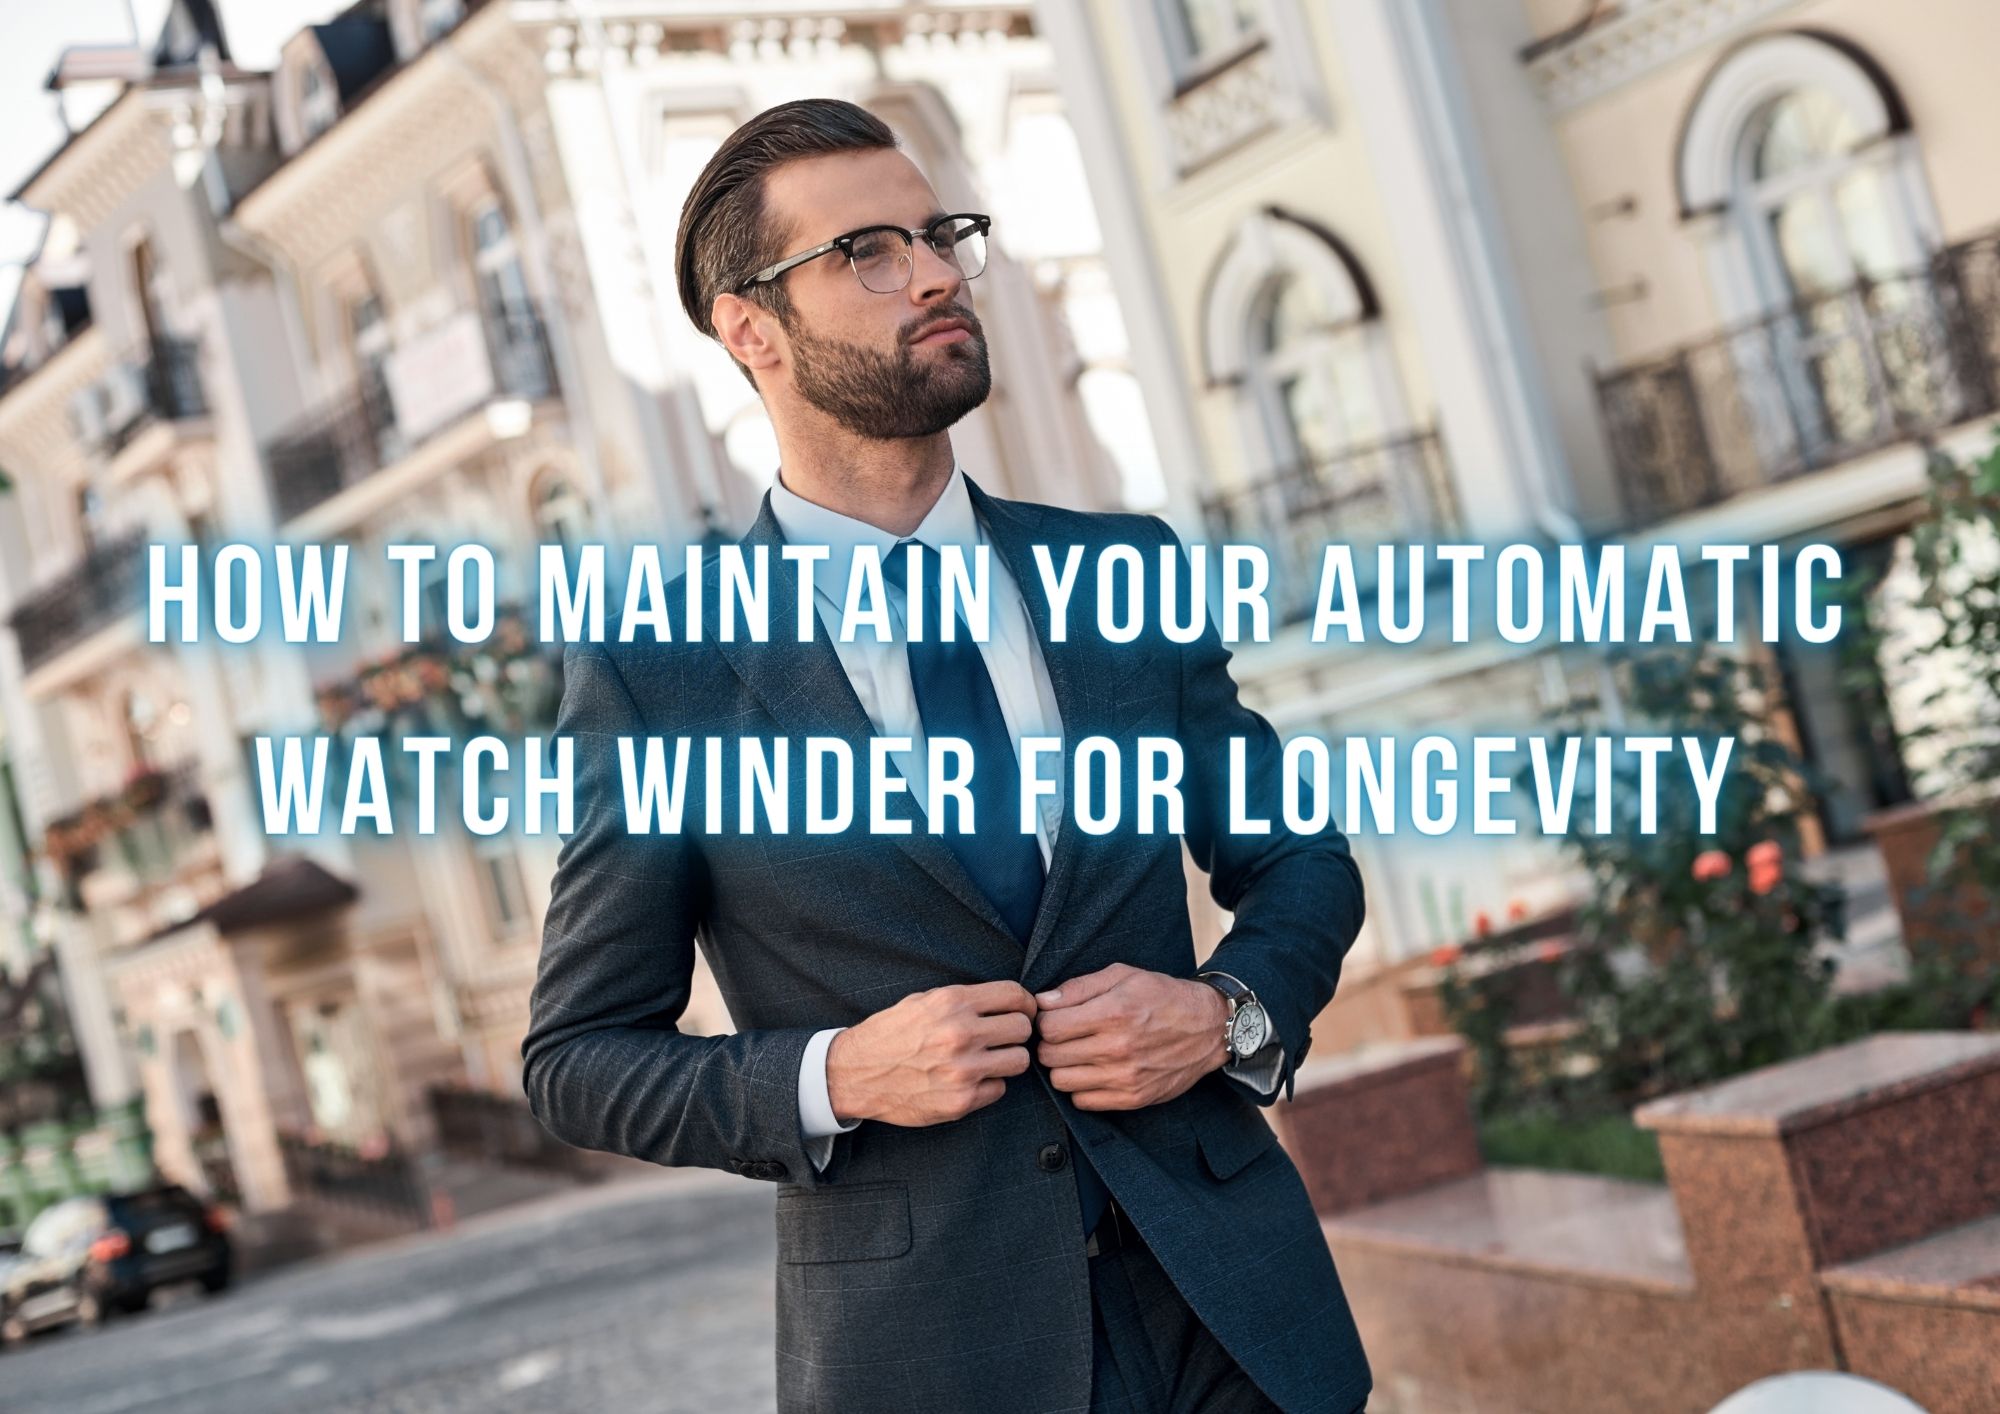 How to Maintain Your Automatic Watch Winder for Longevity